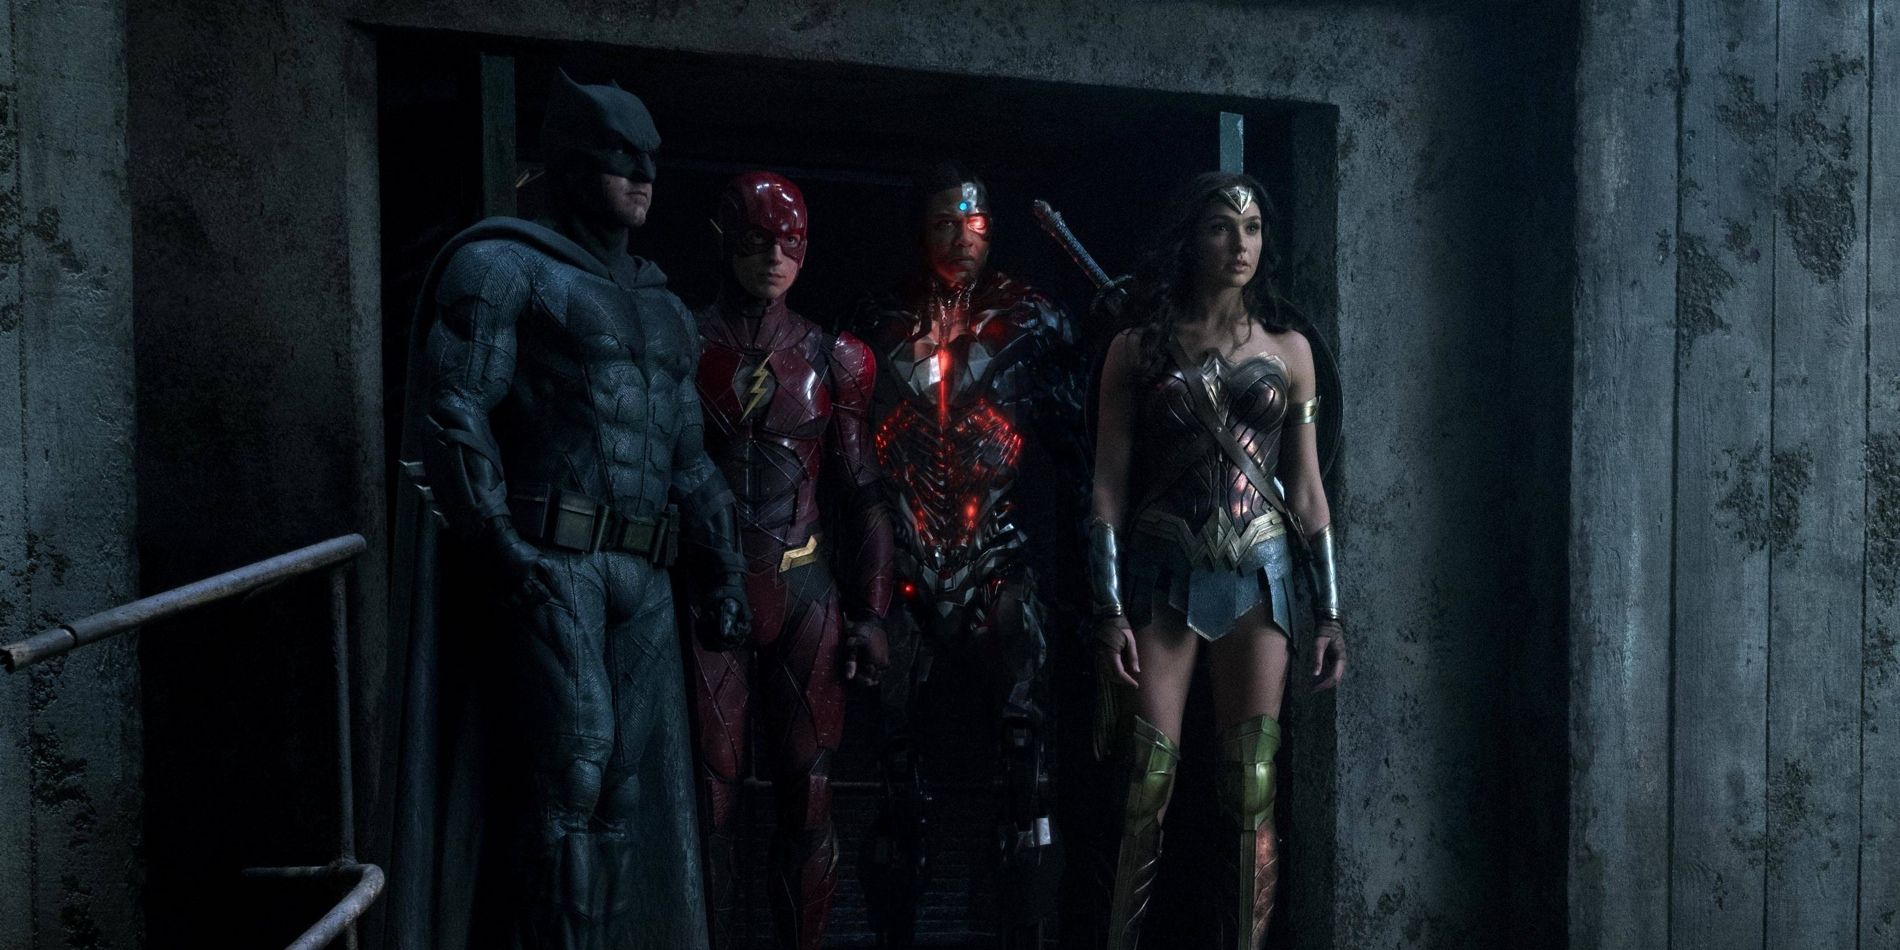 Batman, The Flash, Cyborg, and Wonder Woman in Justice League.